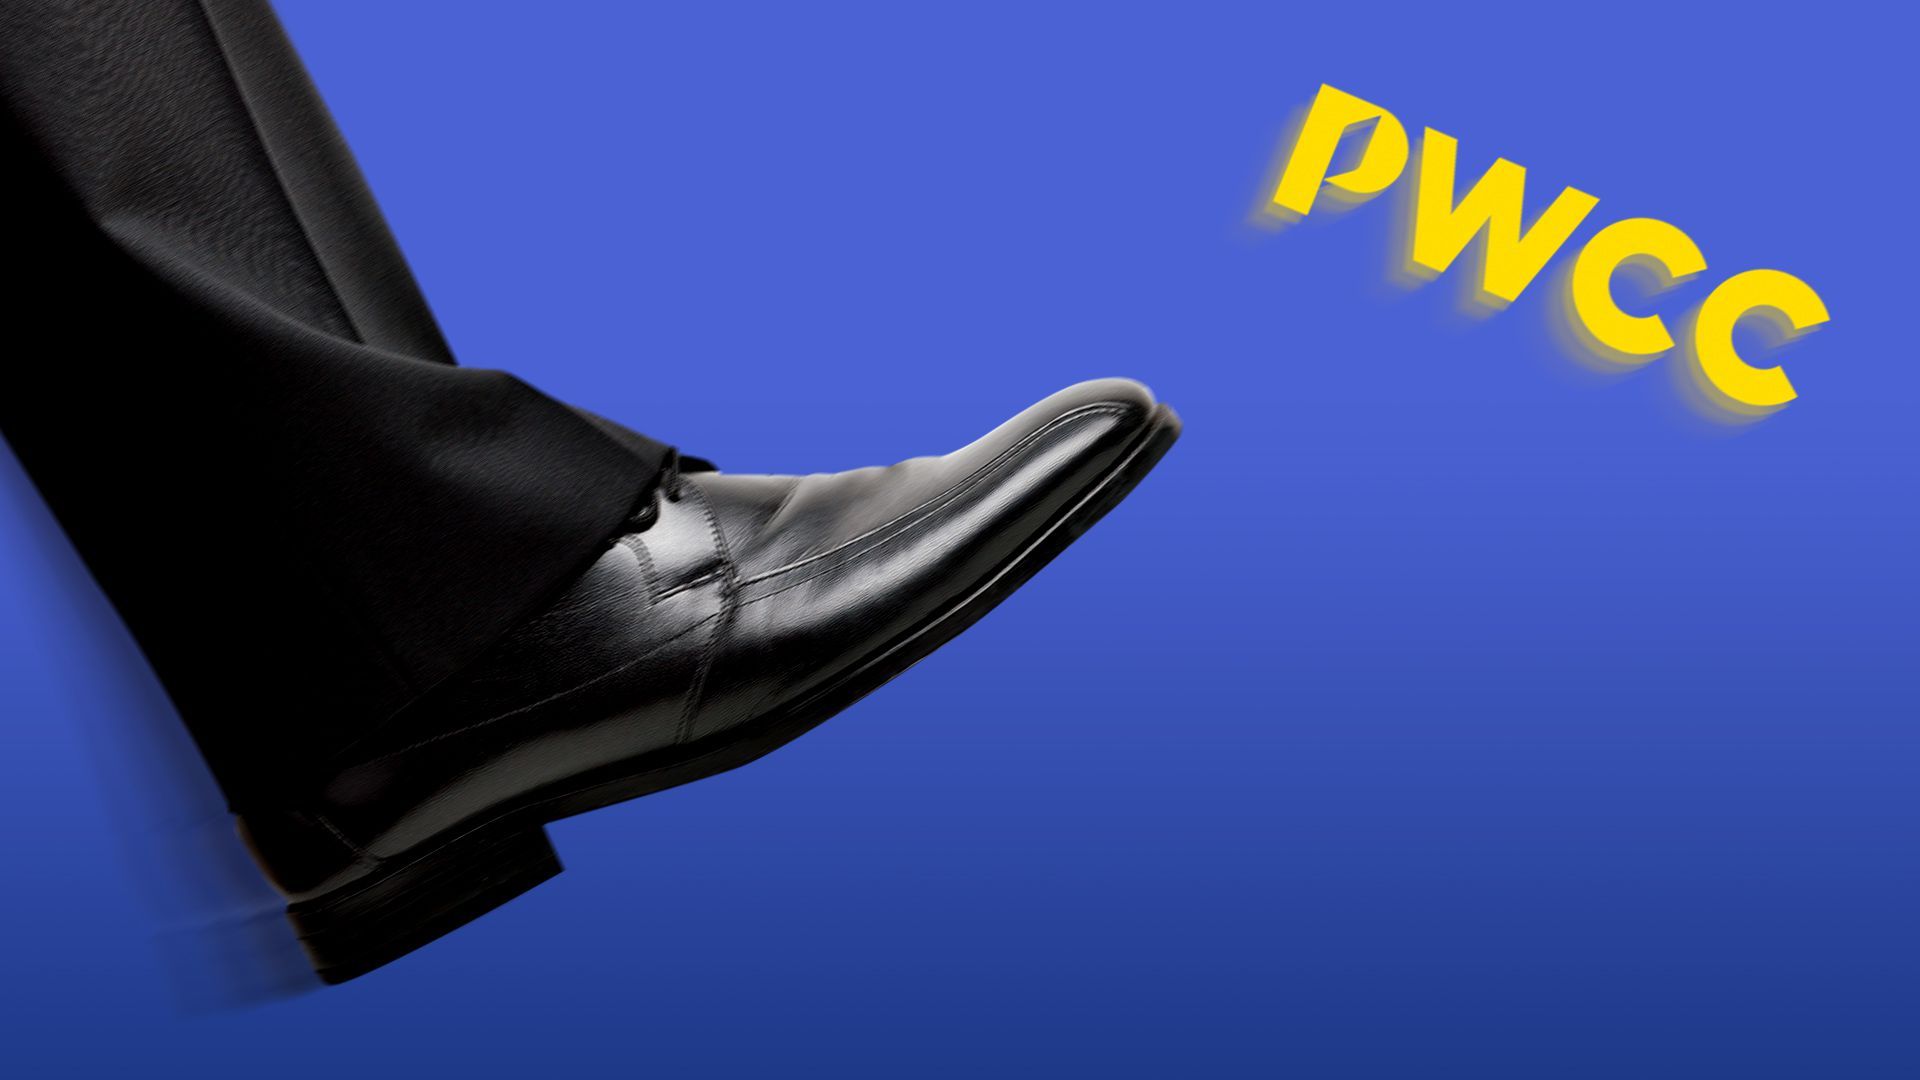 Illustration of a shoe kicking the PWCC logo off screen